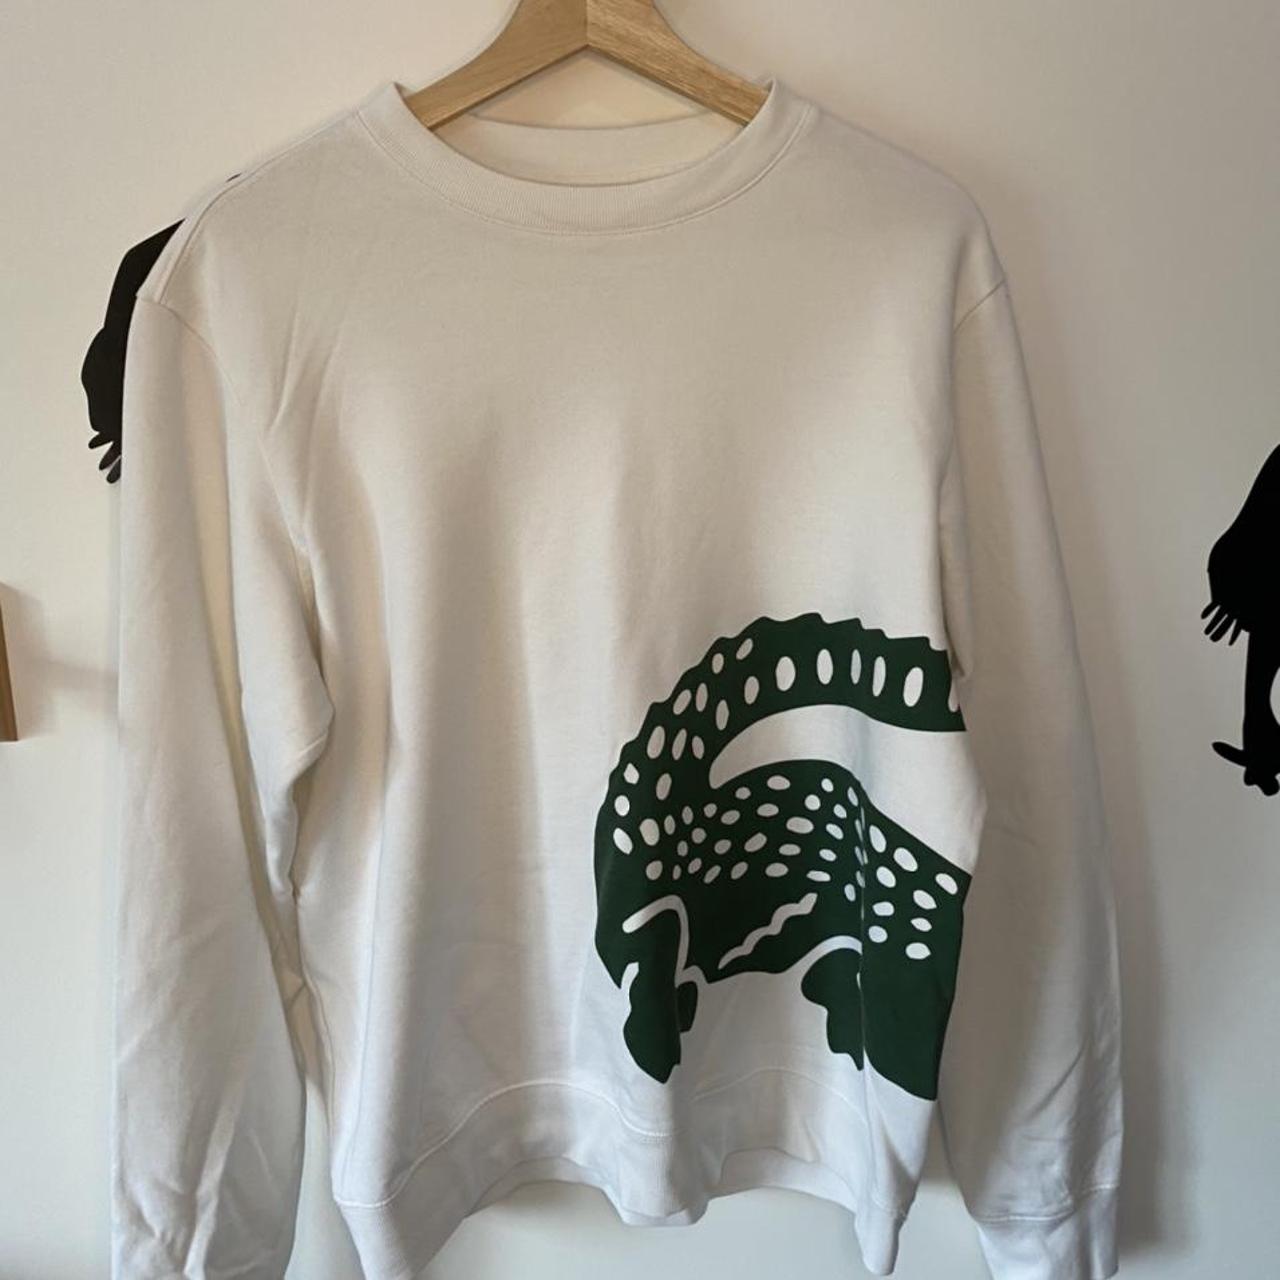 Lacoste medium white and green jumper Open to offers - Depop